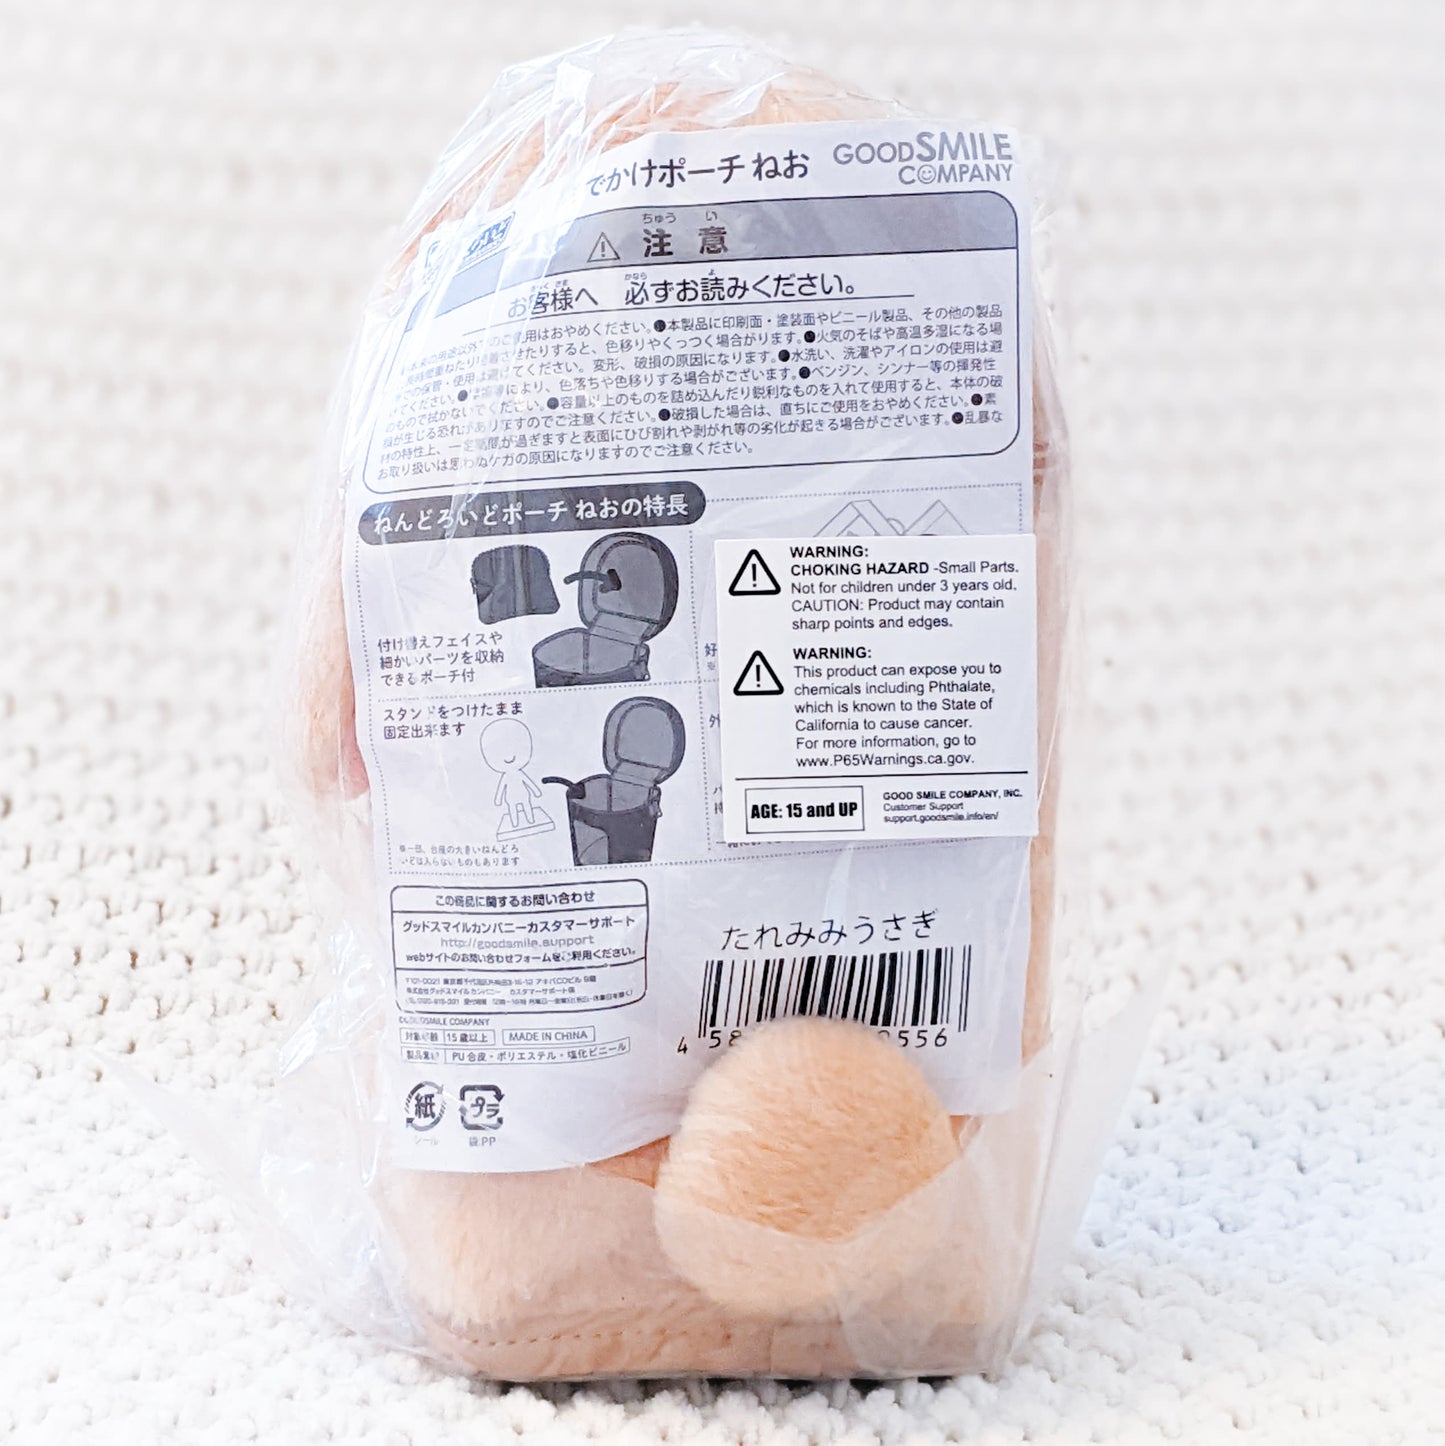 Lop-Eared Rabbit - Nendoroid Figure Doll Pouch Neo Good Smile Company